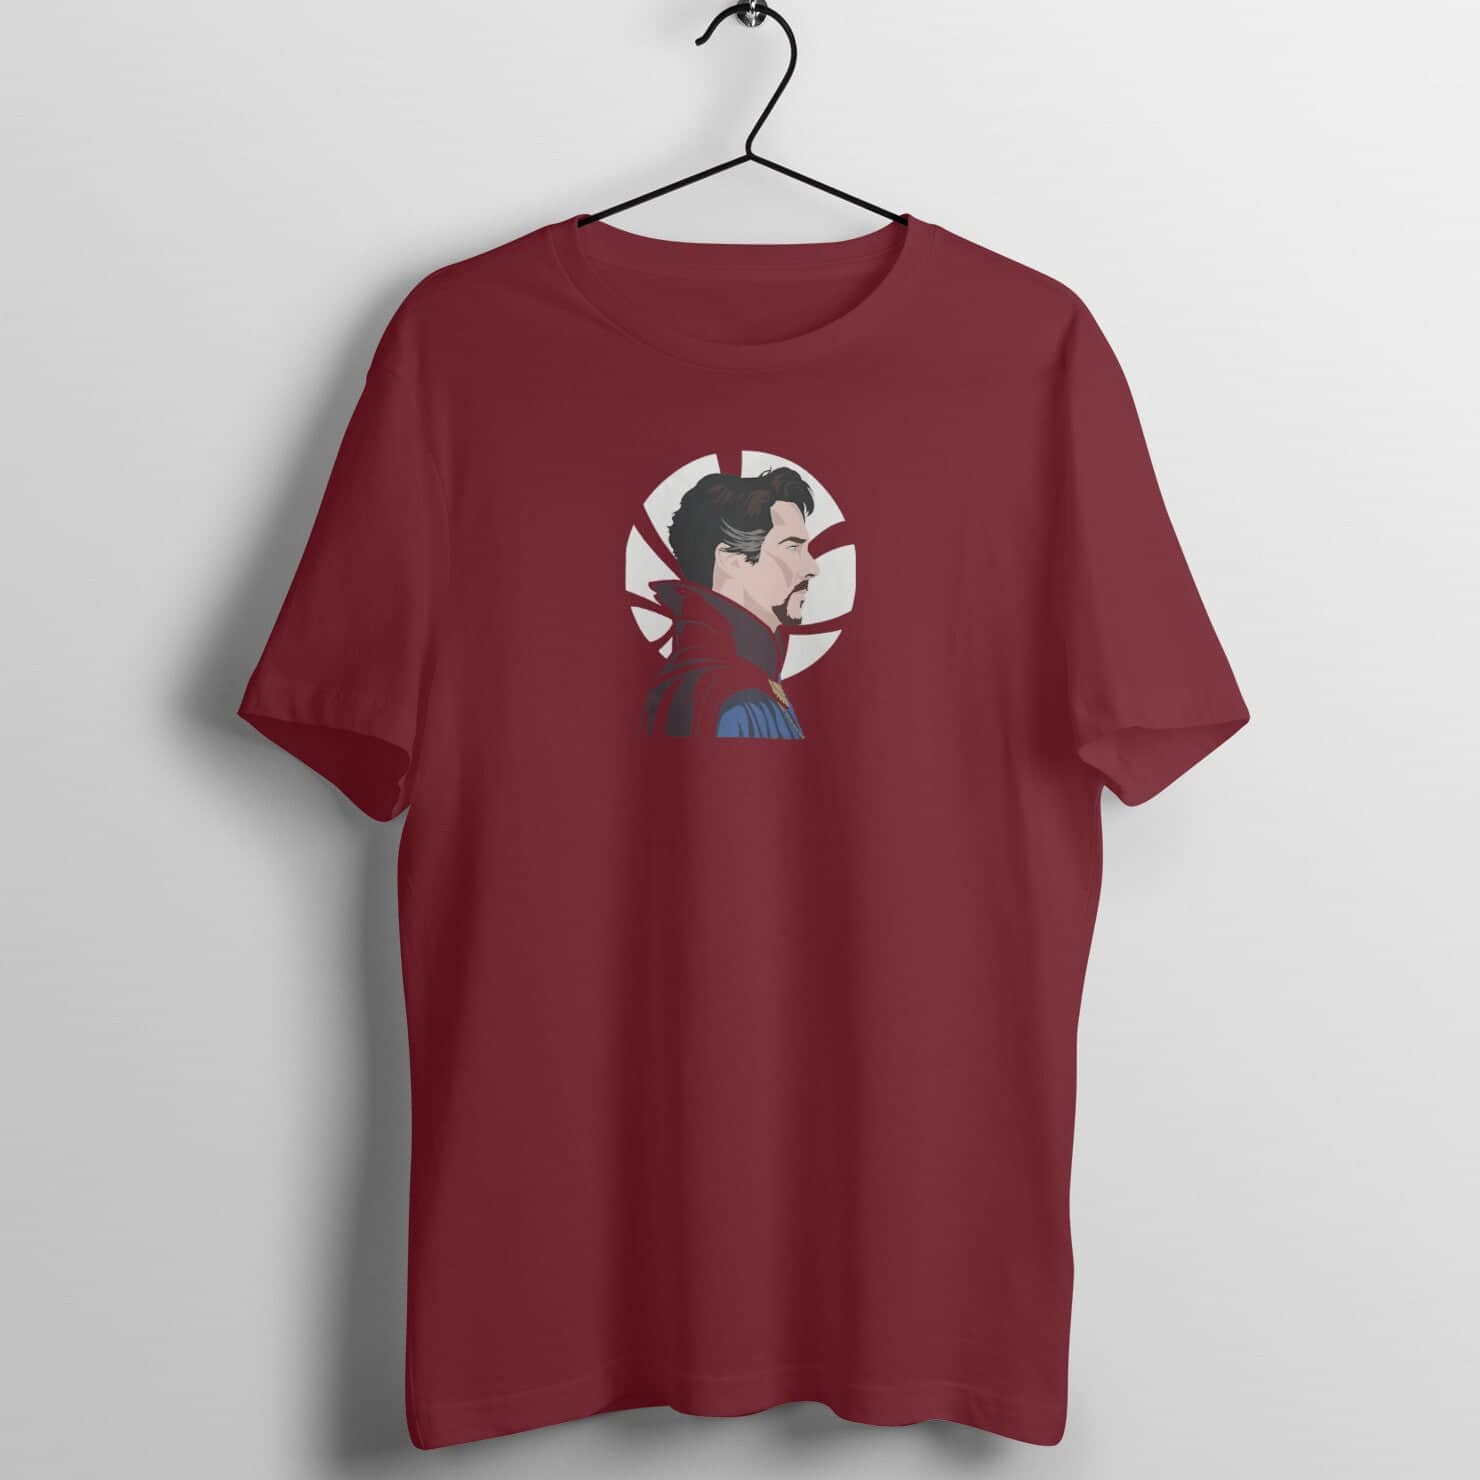 Doctor Strange Madness Side View Exclusive Maroon T Shirt for Men and Women freeshipping - Catch My Drift India